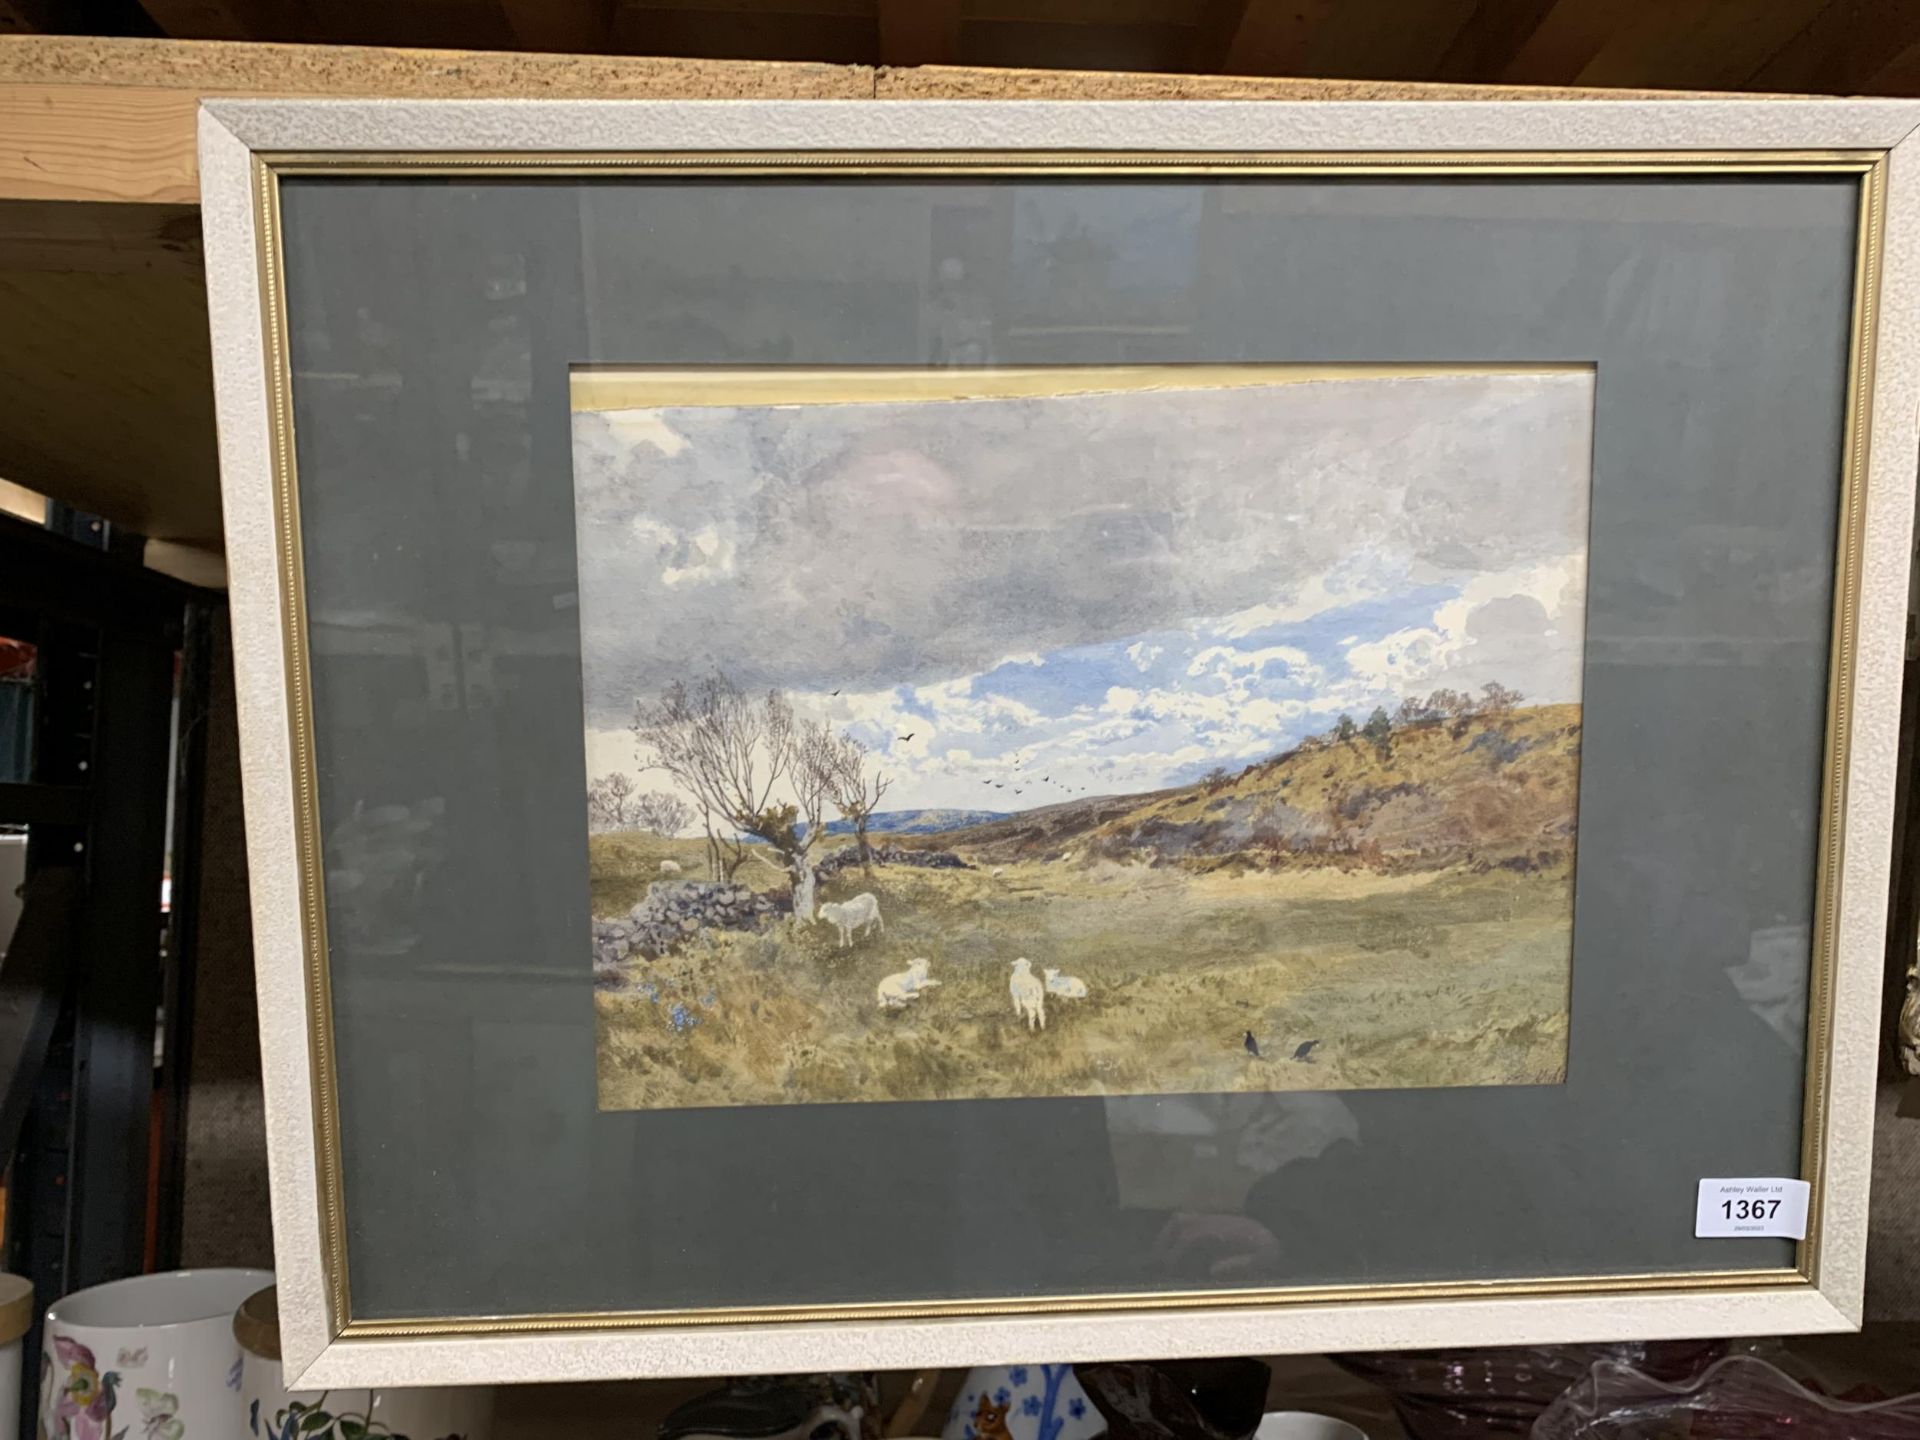 TWO FRAMED WATERCOLOURS, ONE OF SHEEP IN A FIELD THE OTHER A VILLAGE SCENE - Image 2 of 4